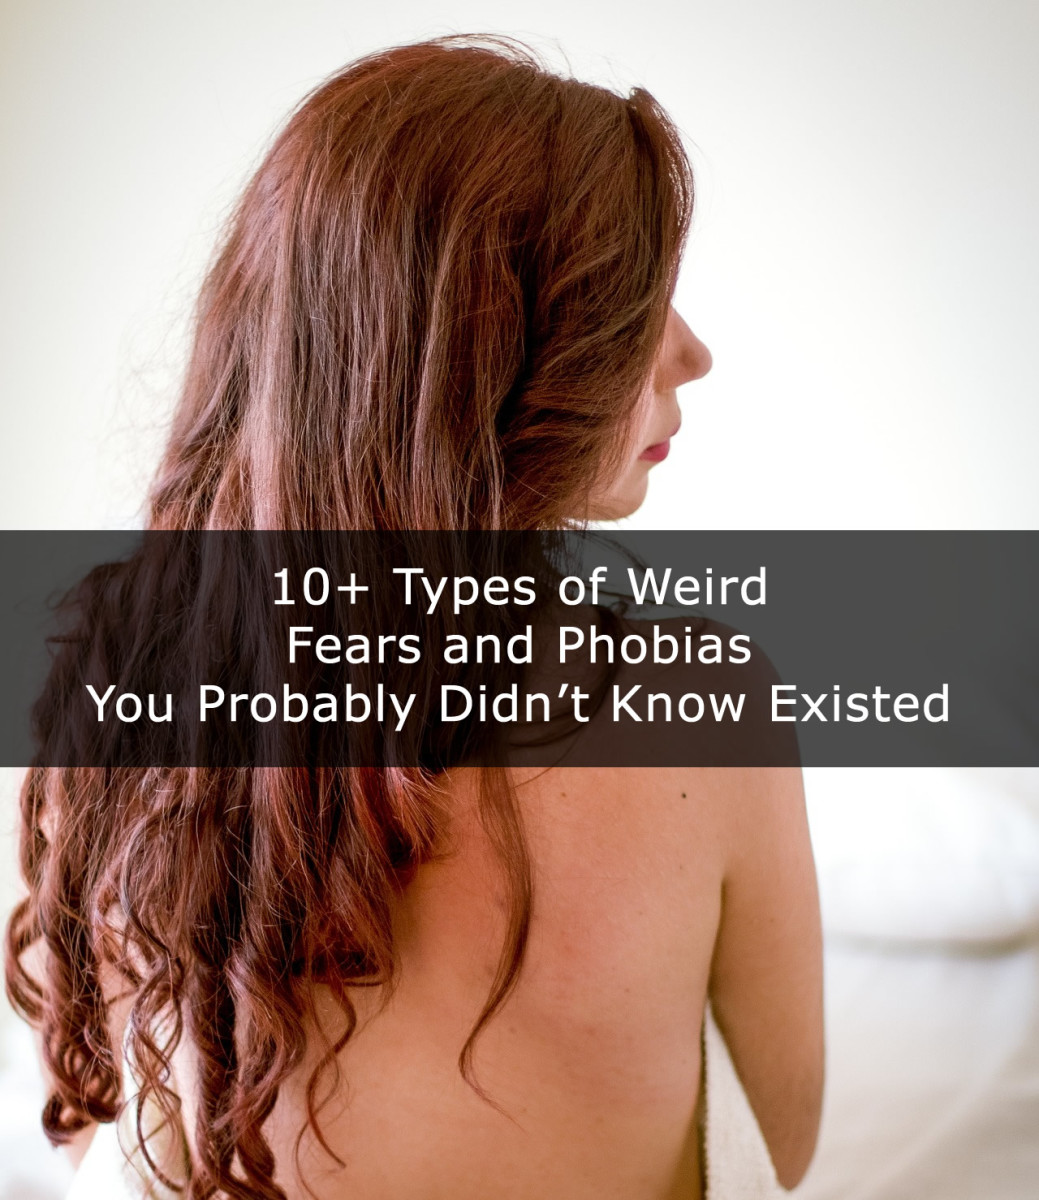 10+ Types of Weird Fears and Phobias You Probably Didn’t Know Existed